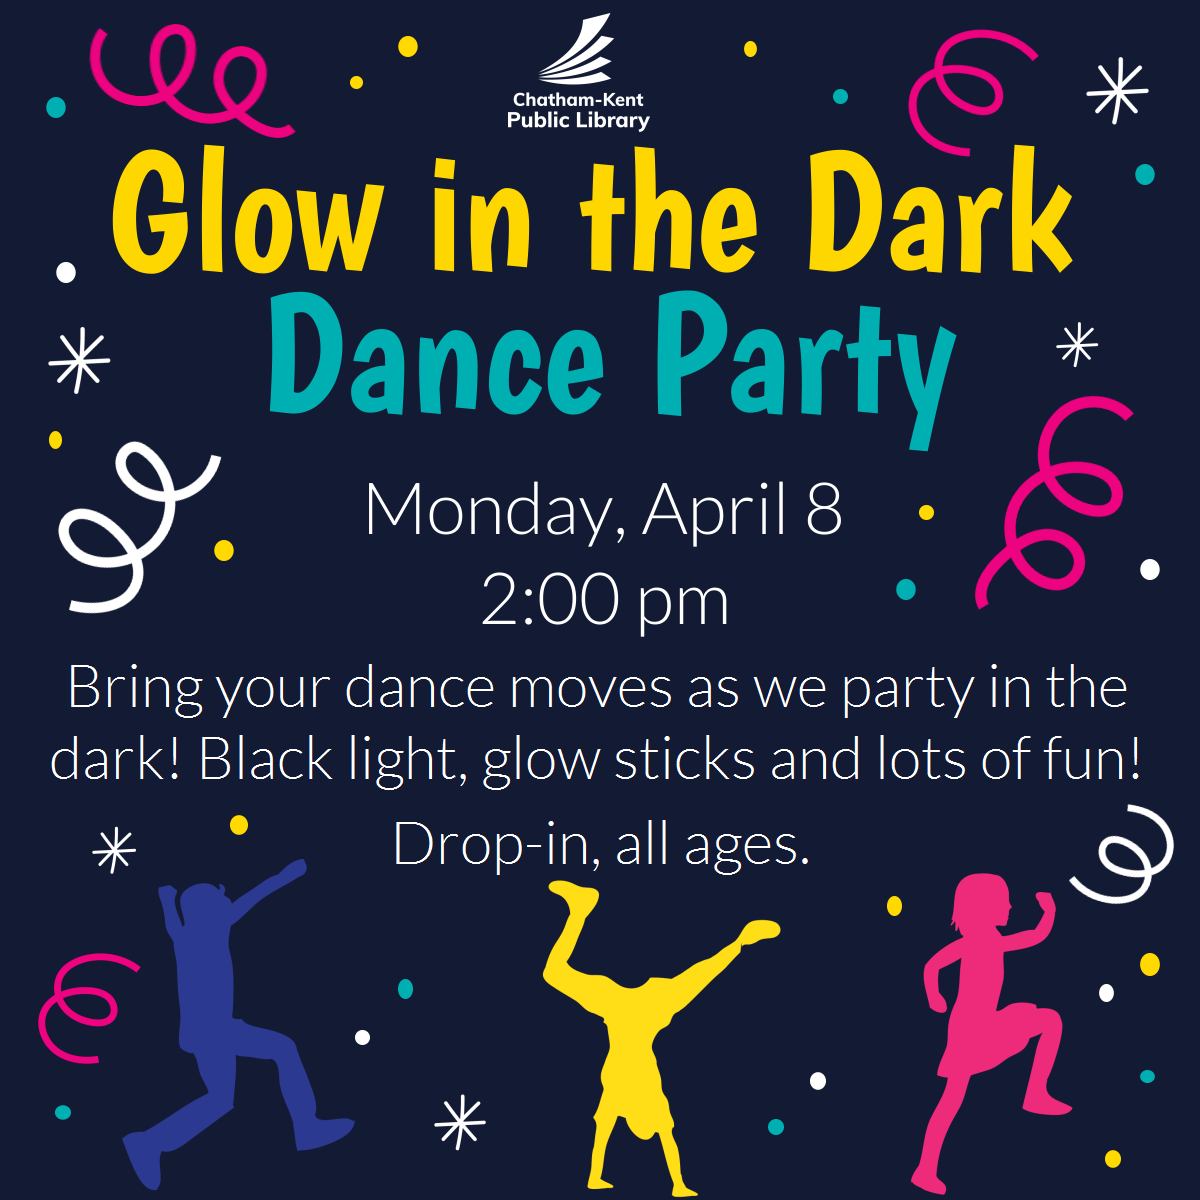 Bring your dance moves and get ready to party at the Chatham Branch of the Chatham-Kent Public Library with a special Glow in the Dark Dance Party! Blacklight, glow sticks, and lots of fun on Monday, April 8 at 2pm.
#YourTVCK #TrulyLocal #CKont #CKPL #DanceParty